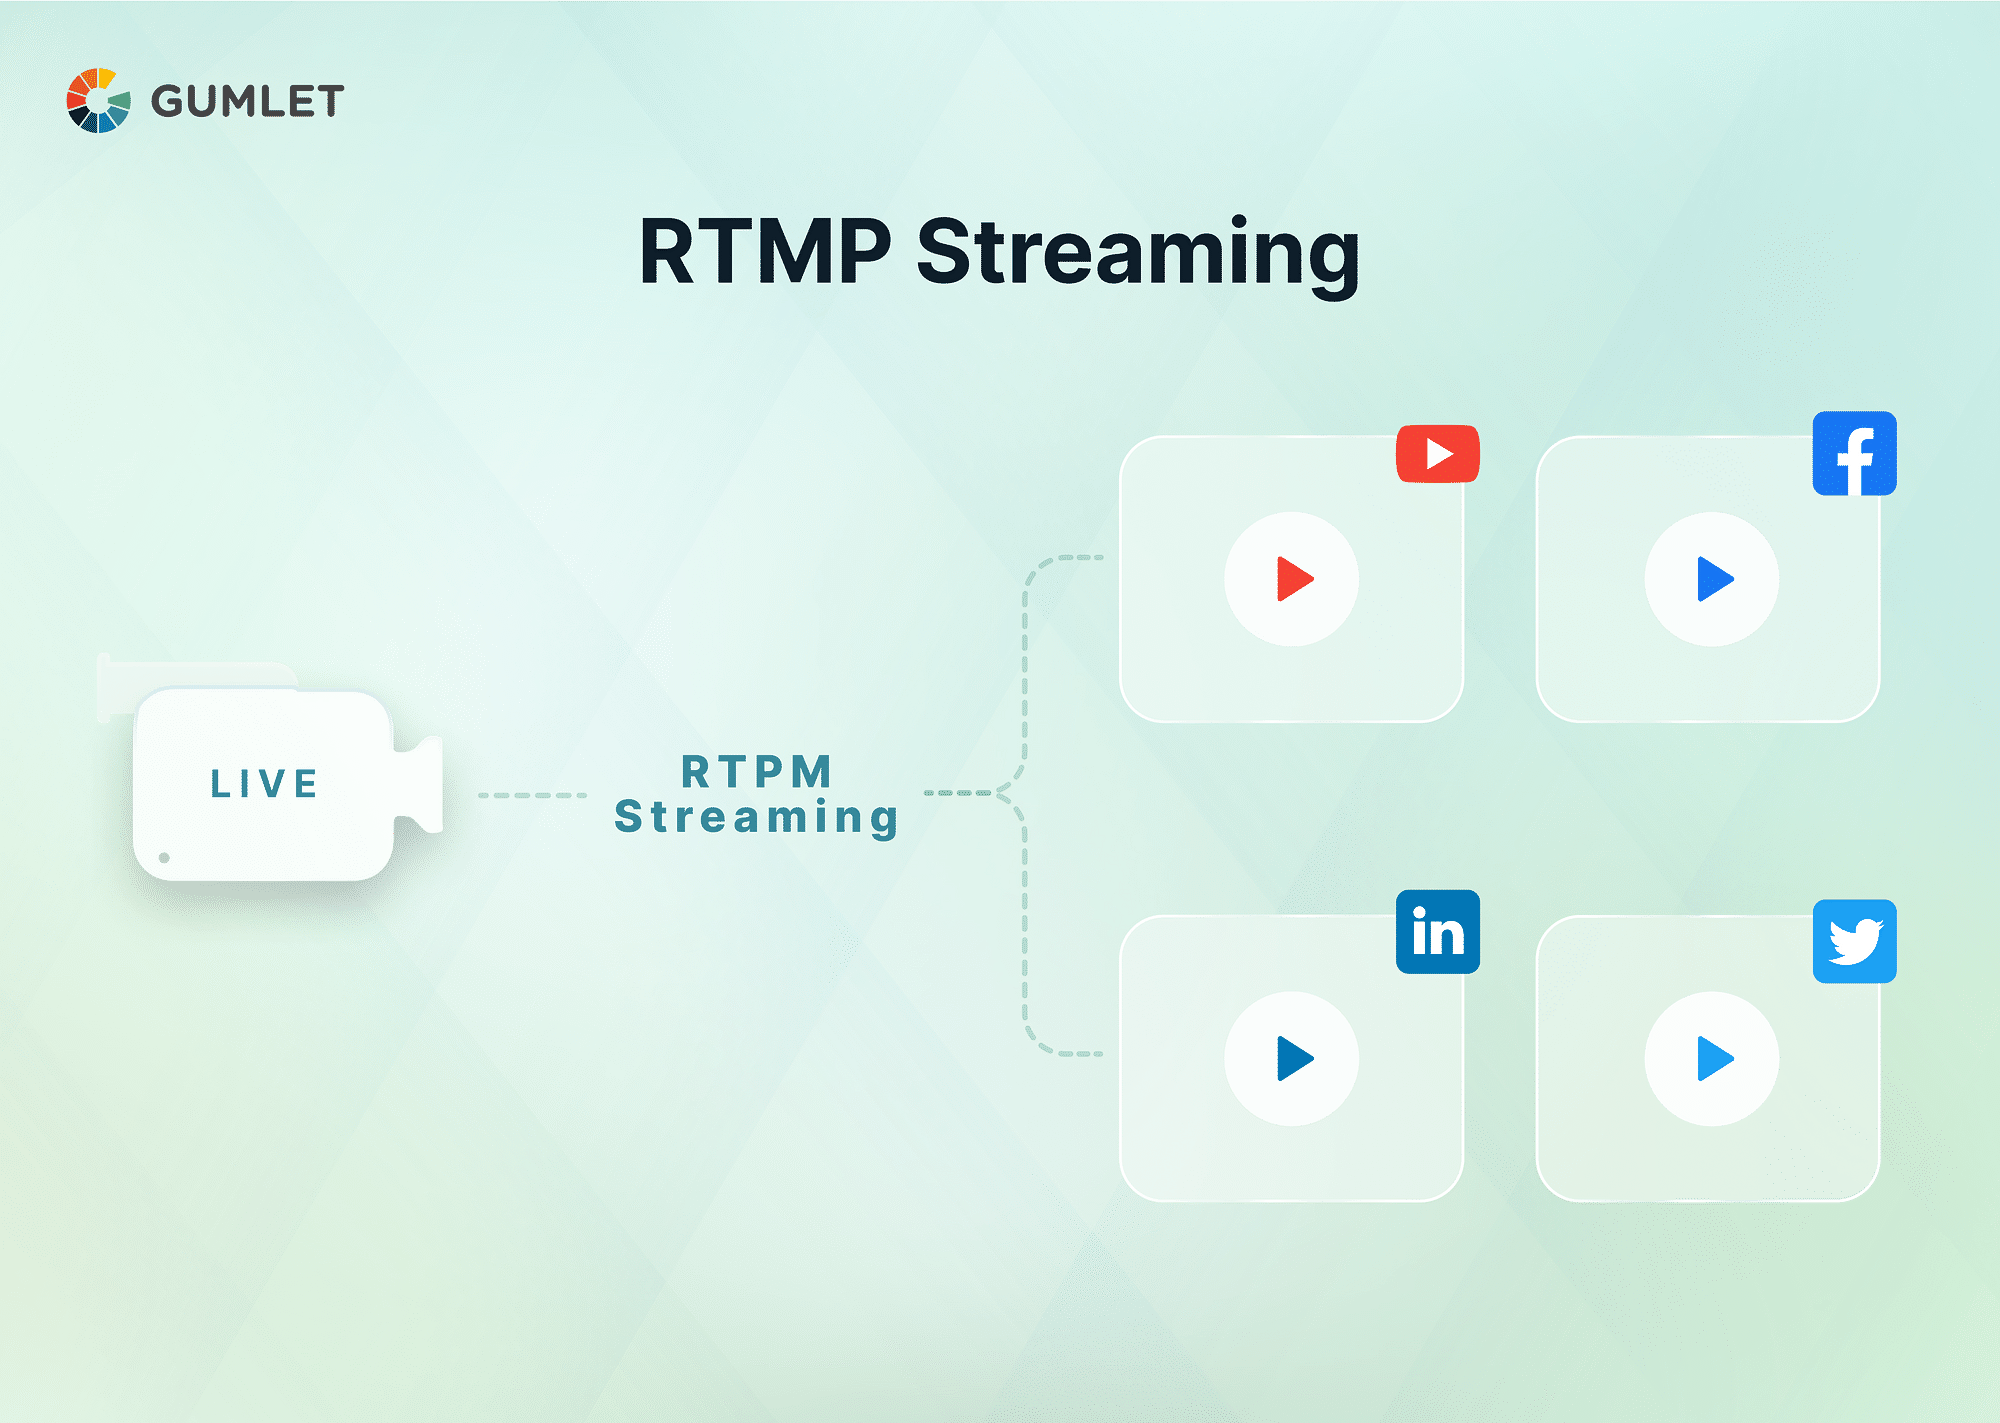 How do you set up RTMP streaming for your website?